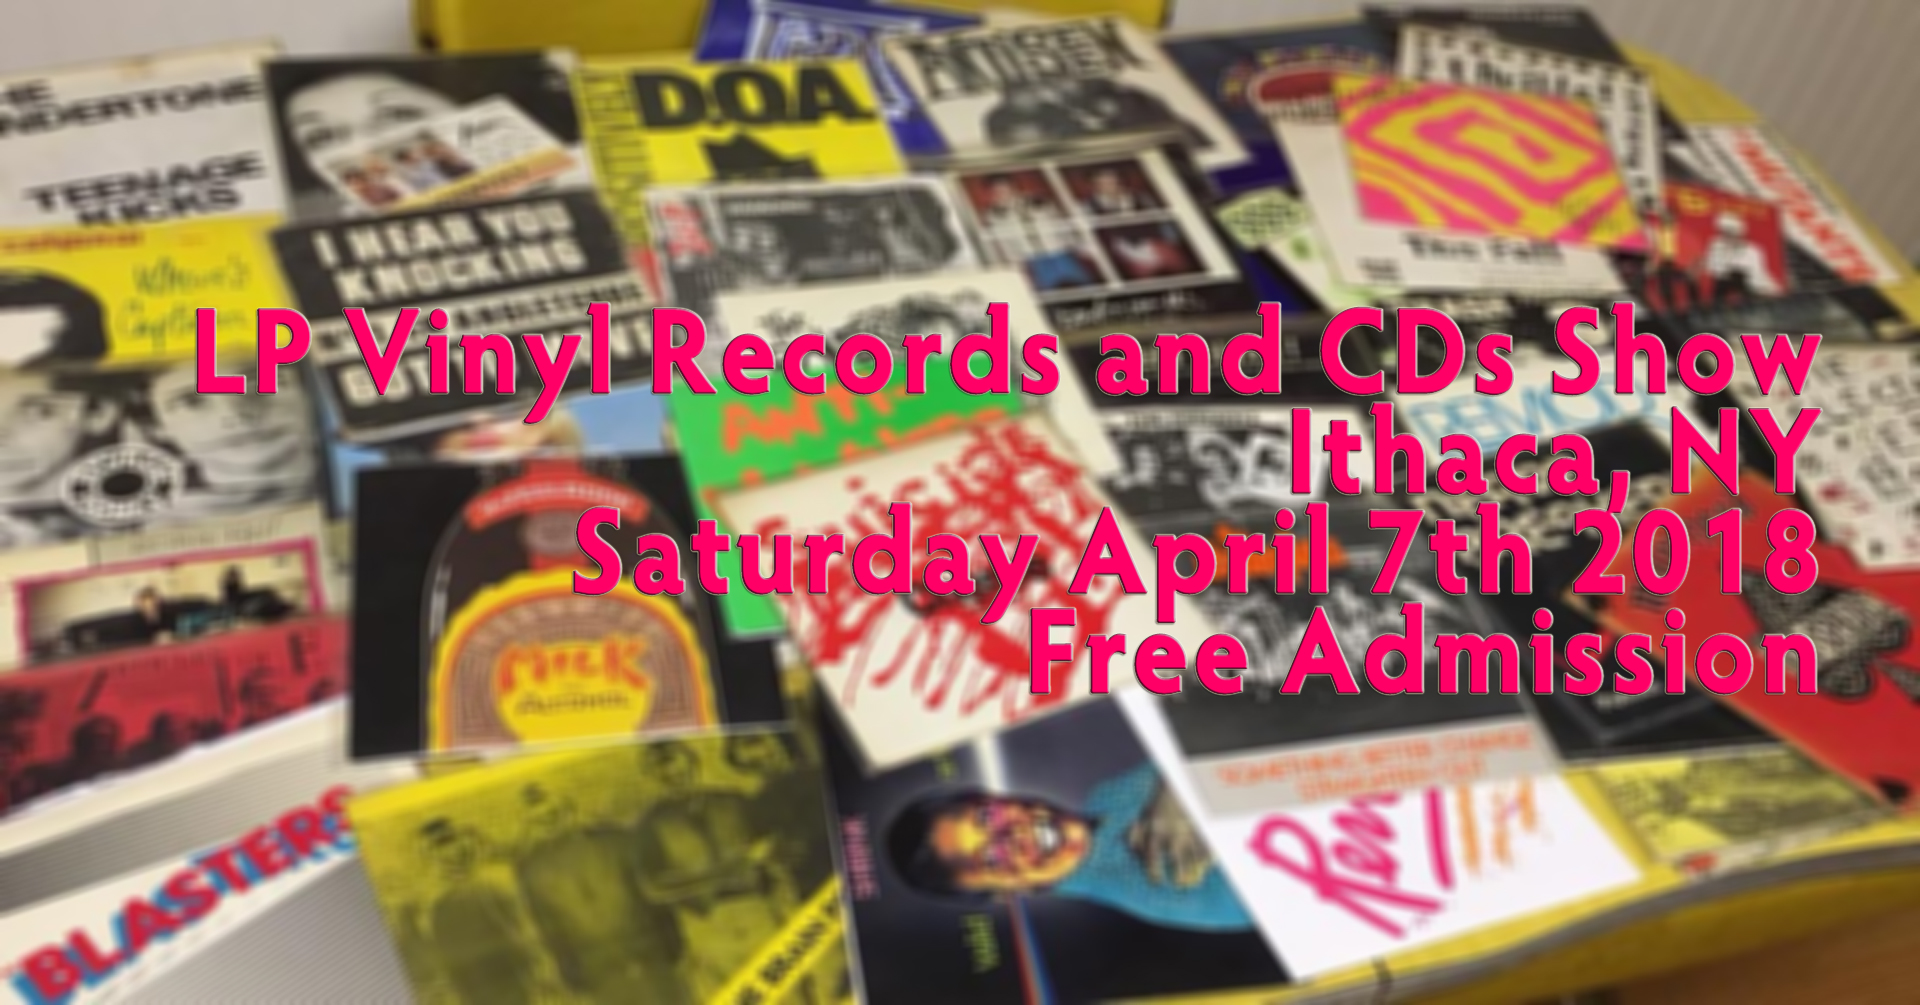 Ithaca, NY – LP Vinyl Records and CDs Show – Saturday April 7th, 2018 – Free Admission